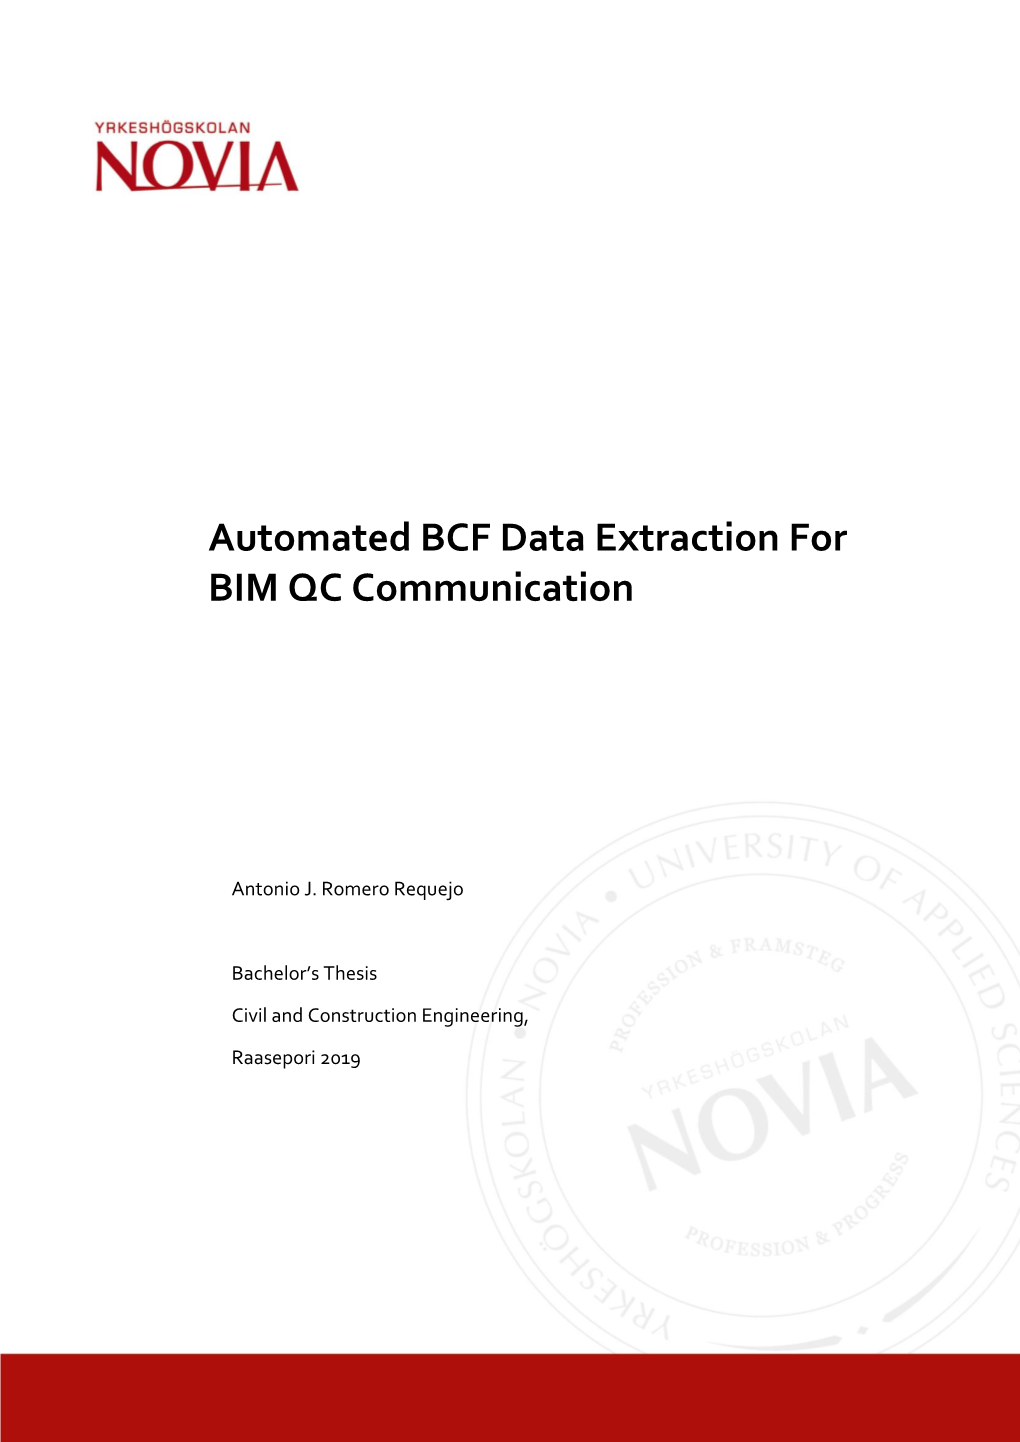 Automated BCF Data Extraction for BIM QC Communication